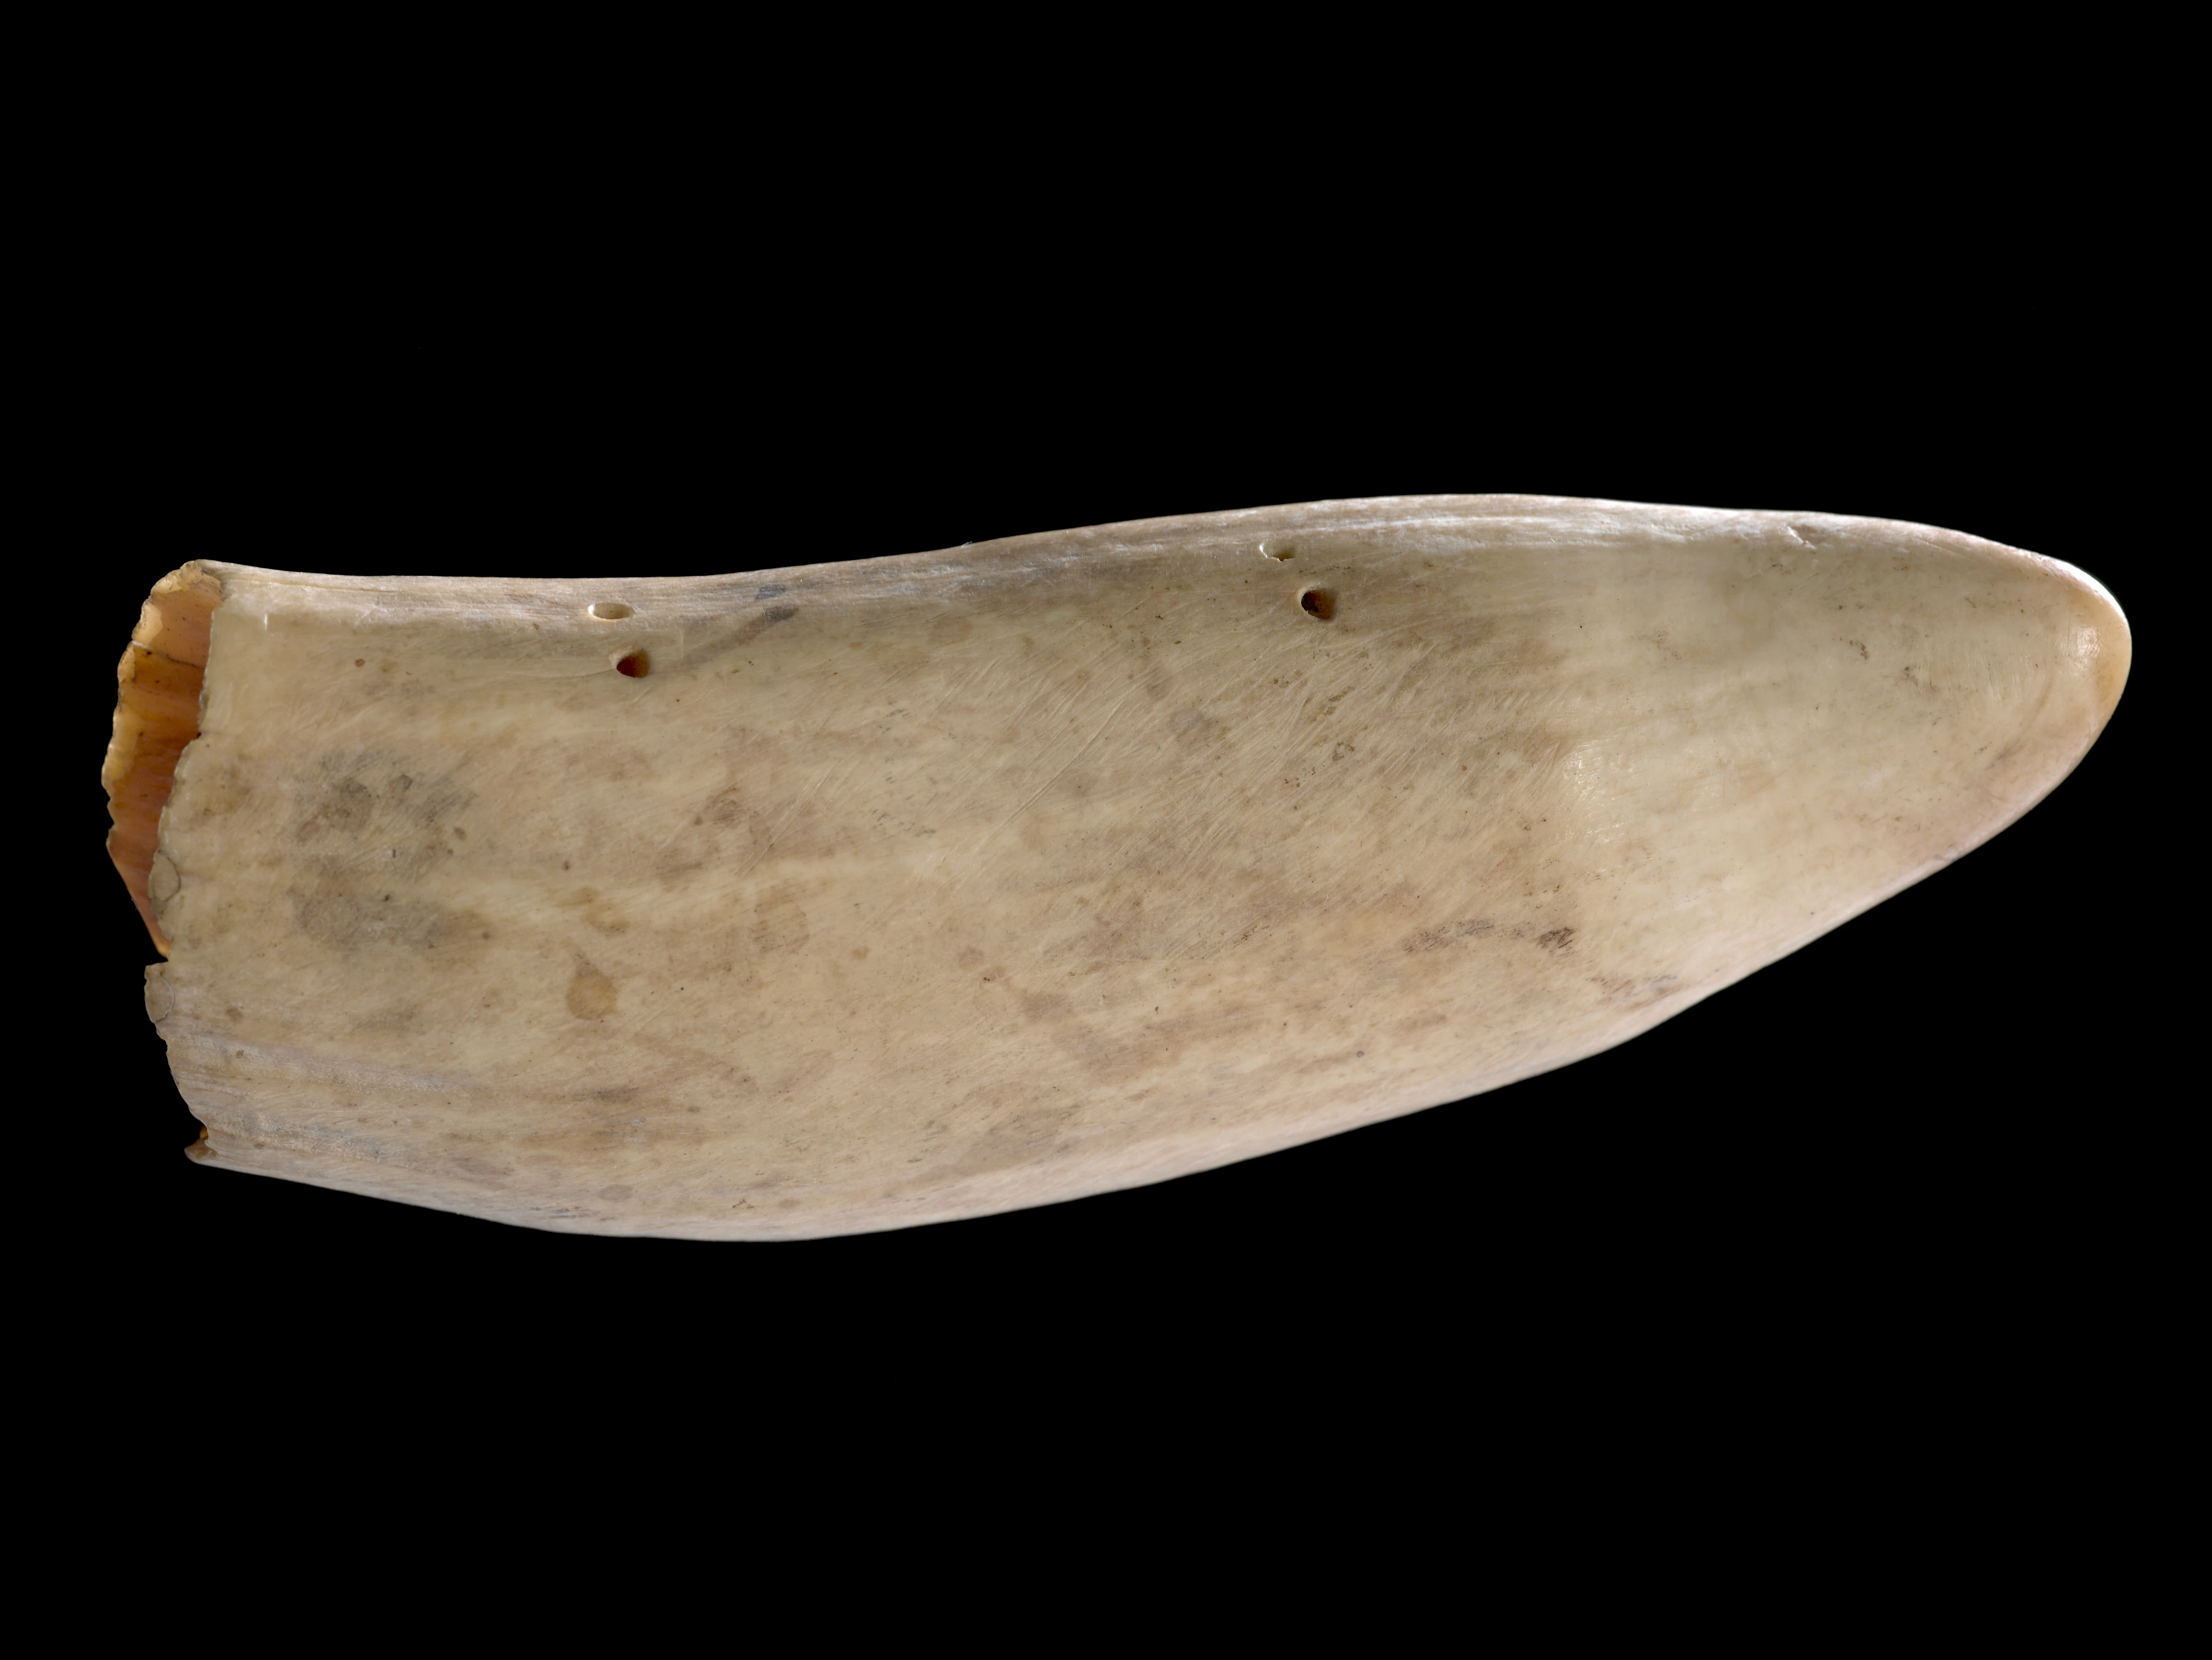 A hollow whale tooth with small holes drilled into it on a black background.